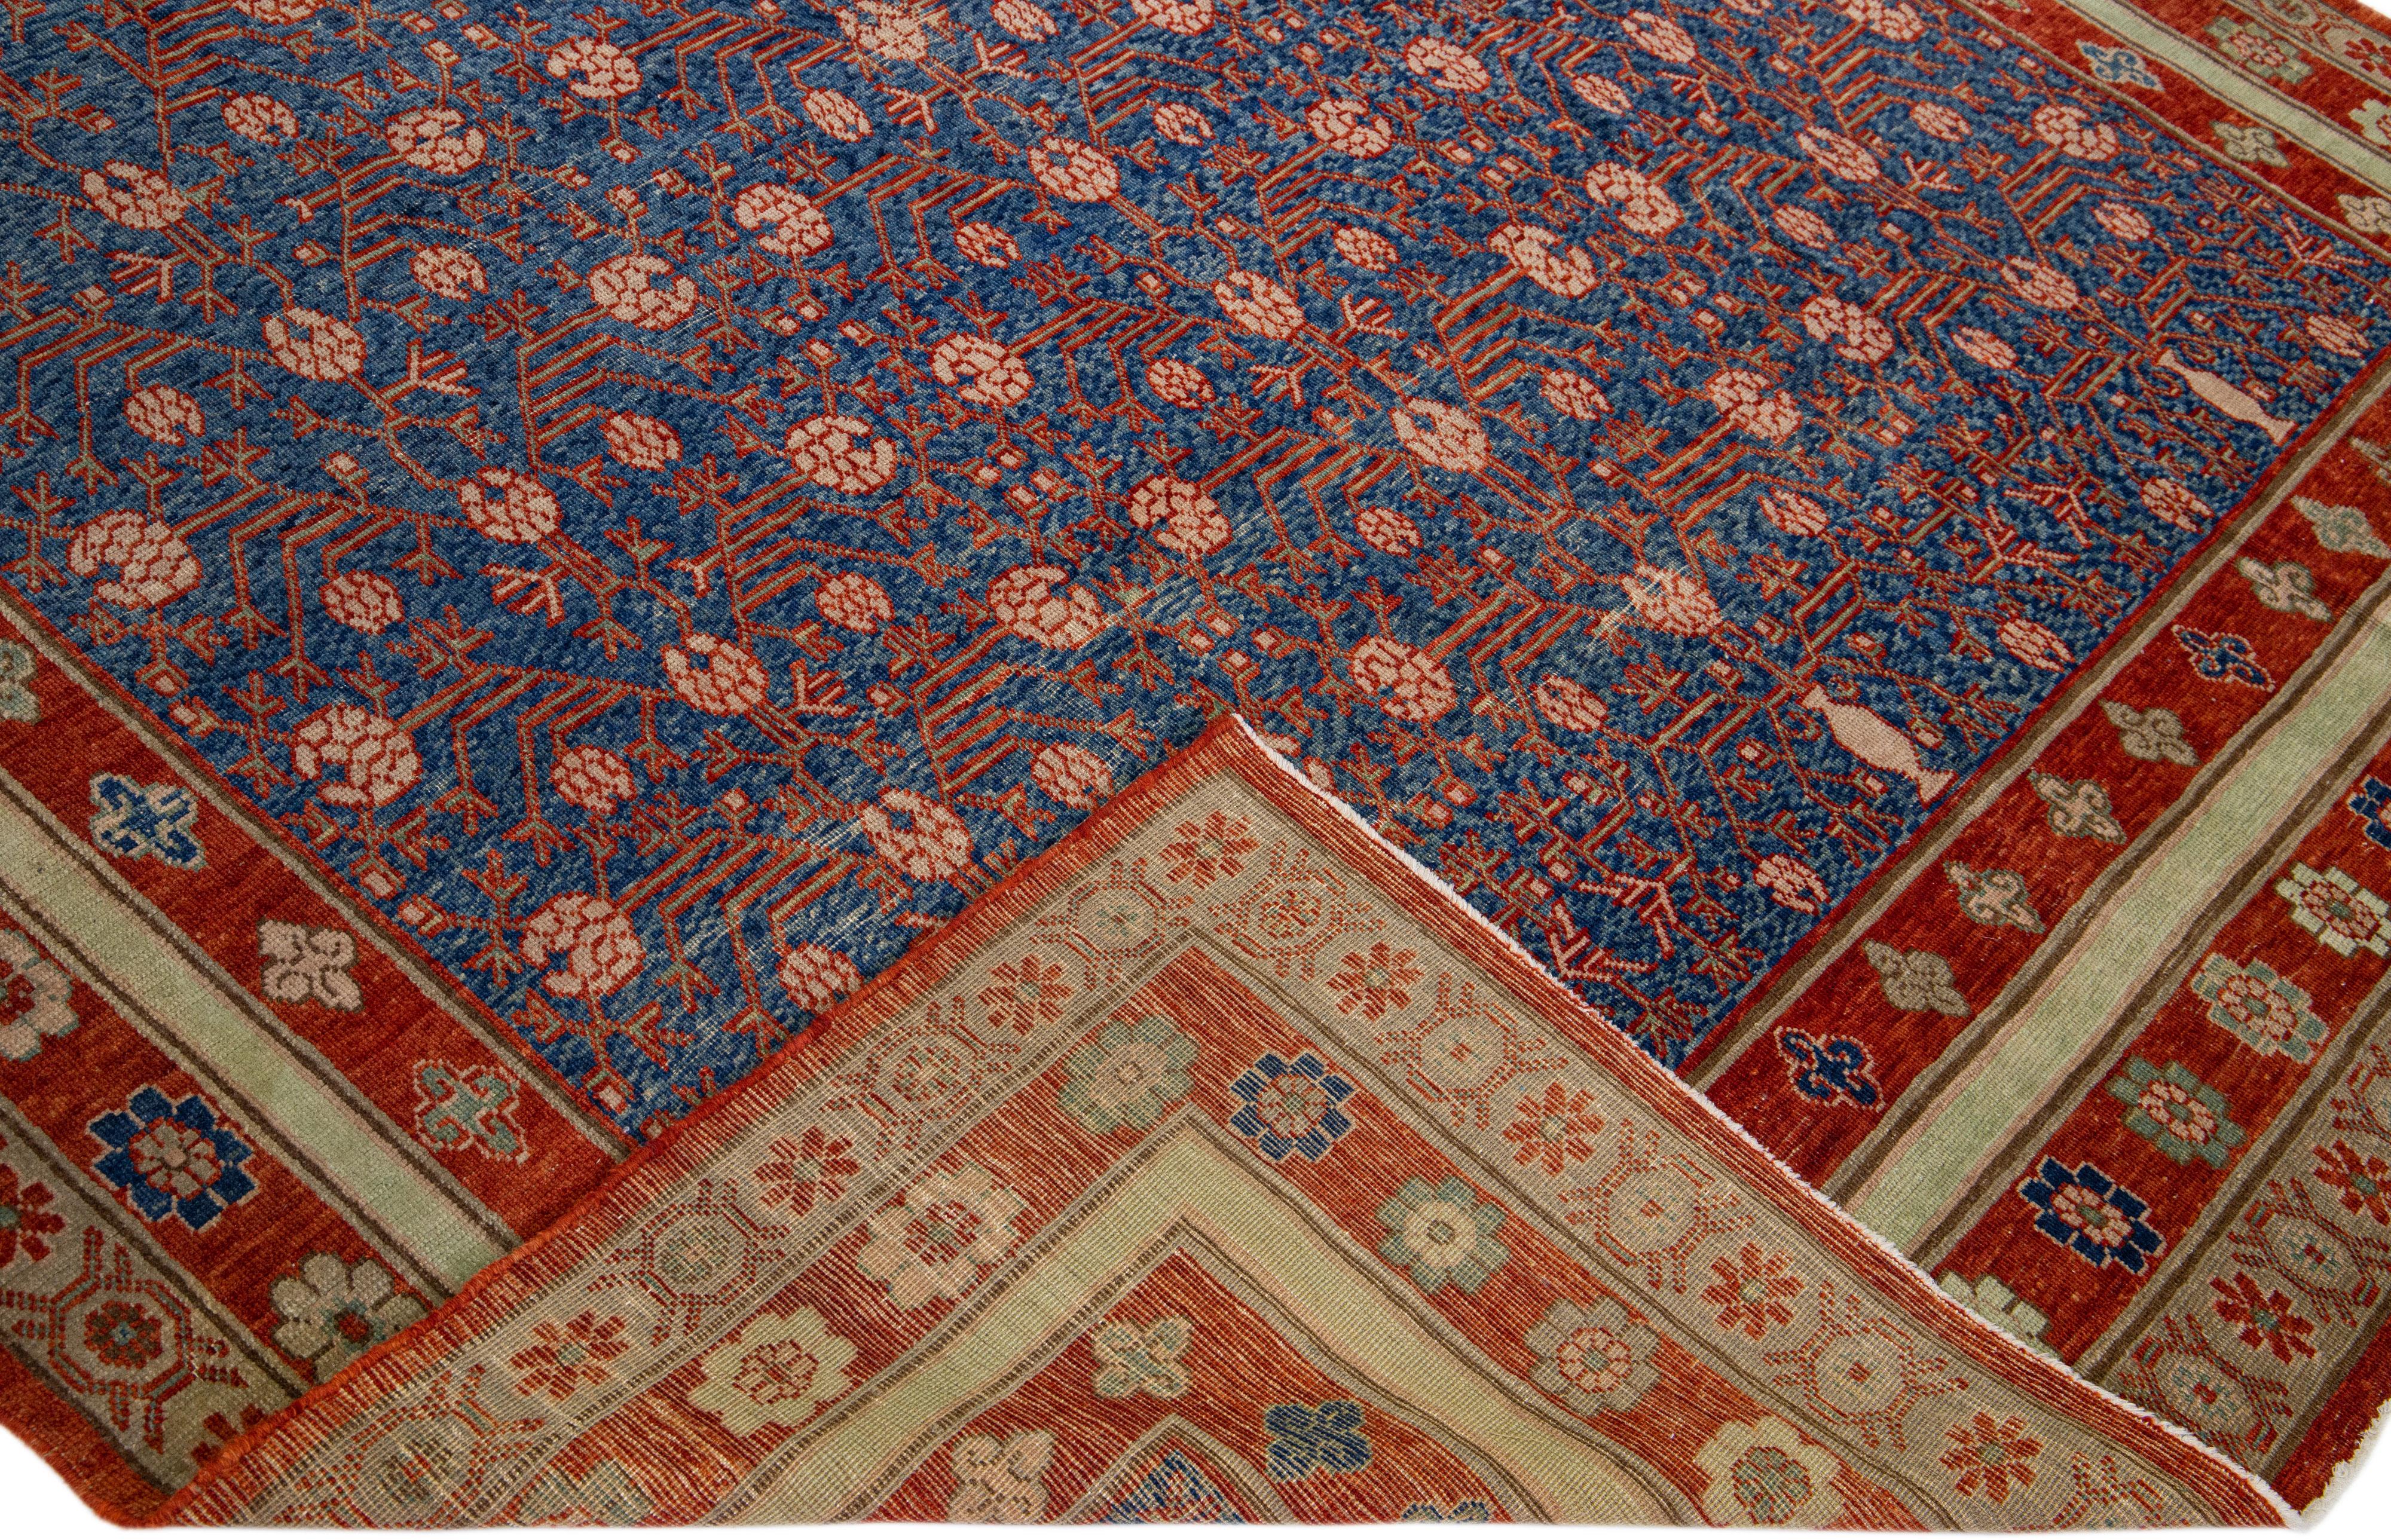 Beautiful vintage Khotan style rug with a blue field. This rug has a floral-designed red frame with multicolor accents in interconnected pomegranates rosettes, leaves, and vines design. 

This rug measures 7'8